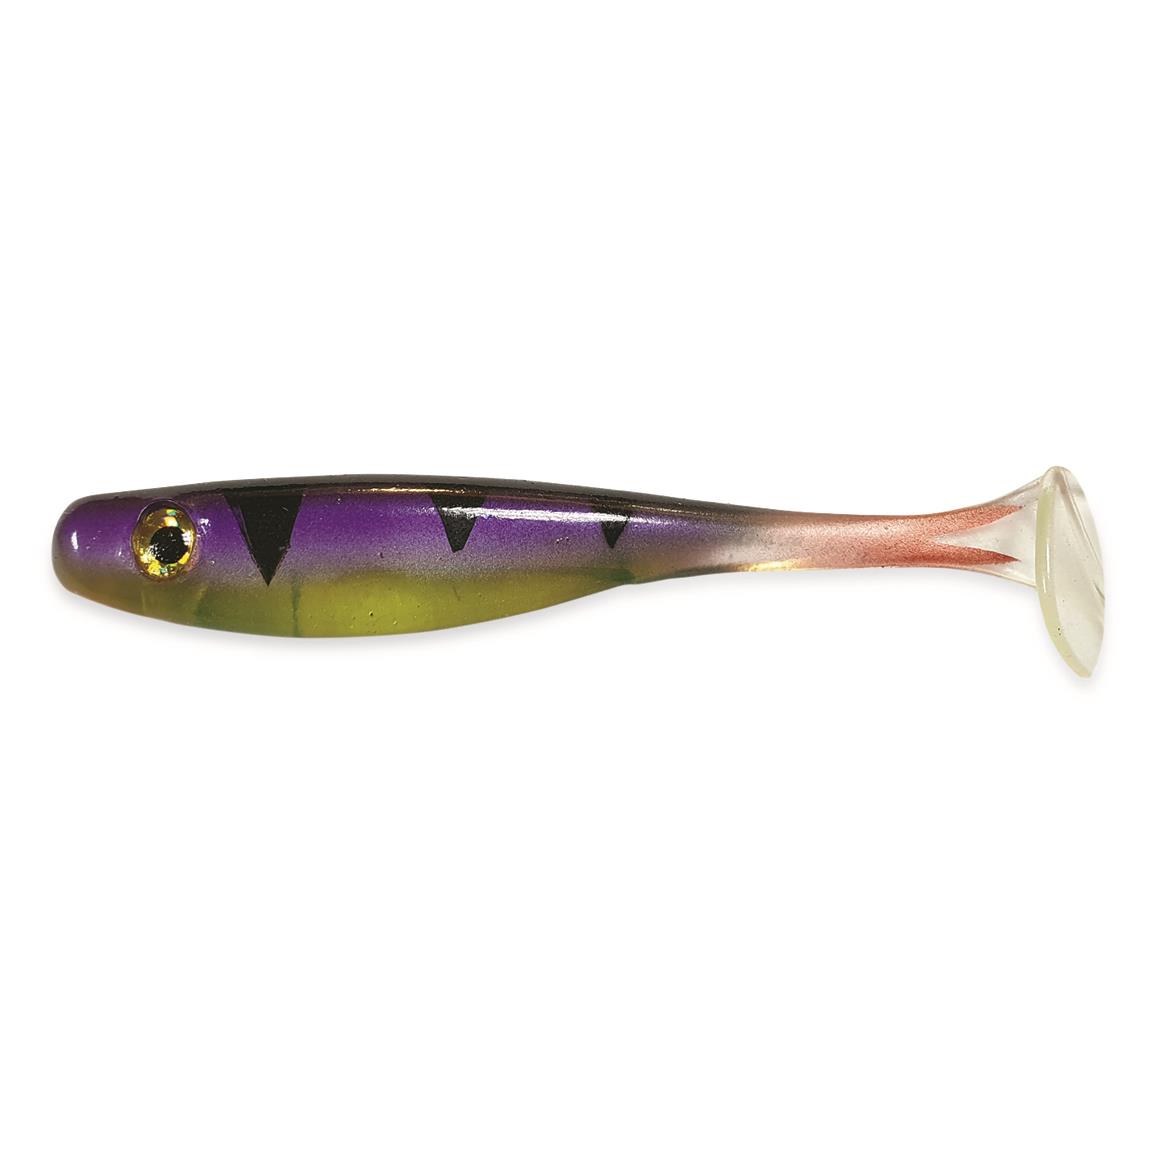 Big Bite Baits 3.5" Suicide Shad Lure, 5 pack, Purple Perch